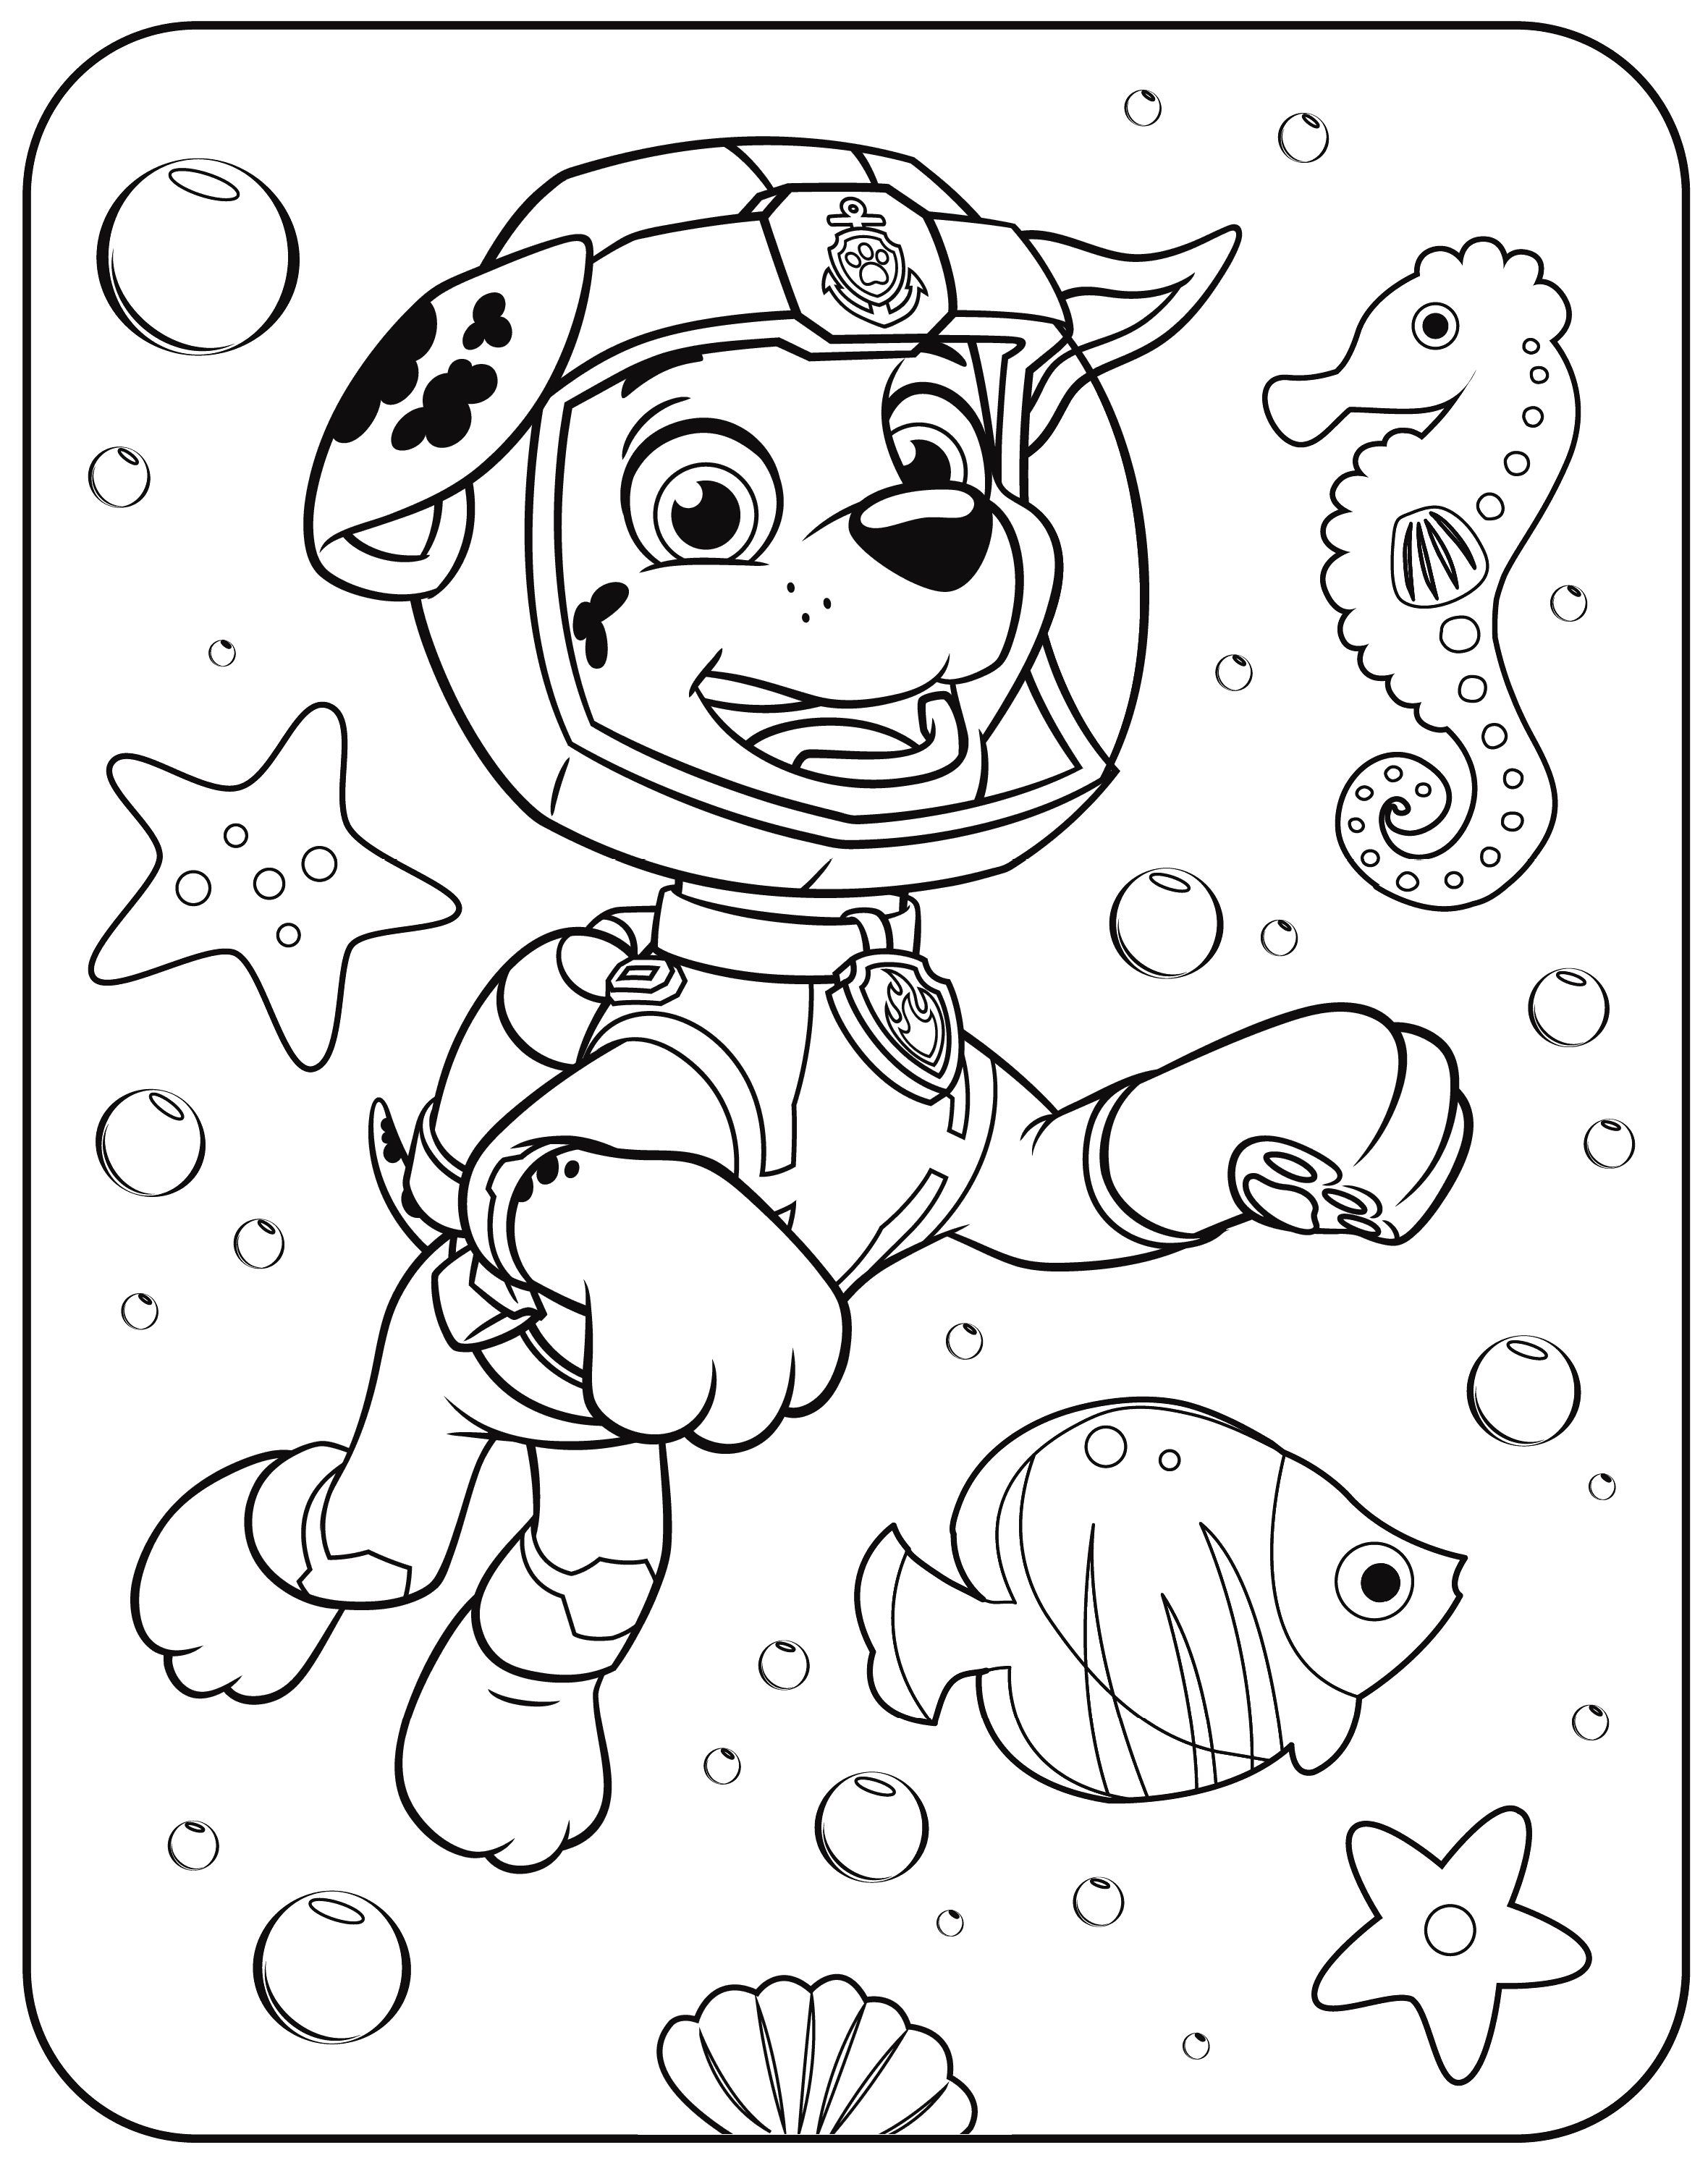 PAW Patrol Marshall Underwater Coloring Page